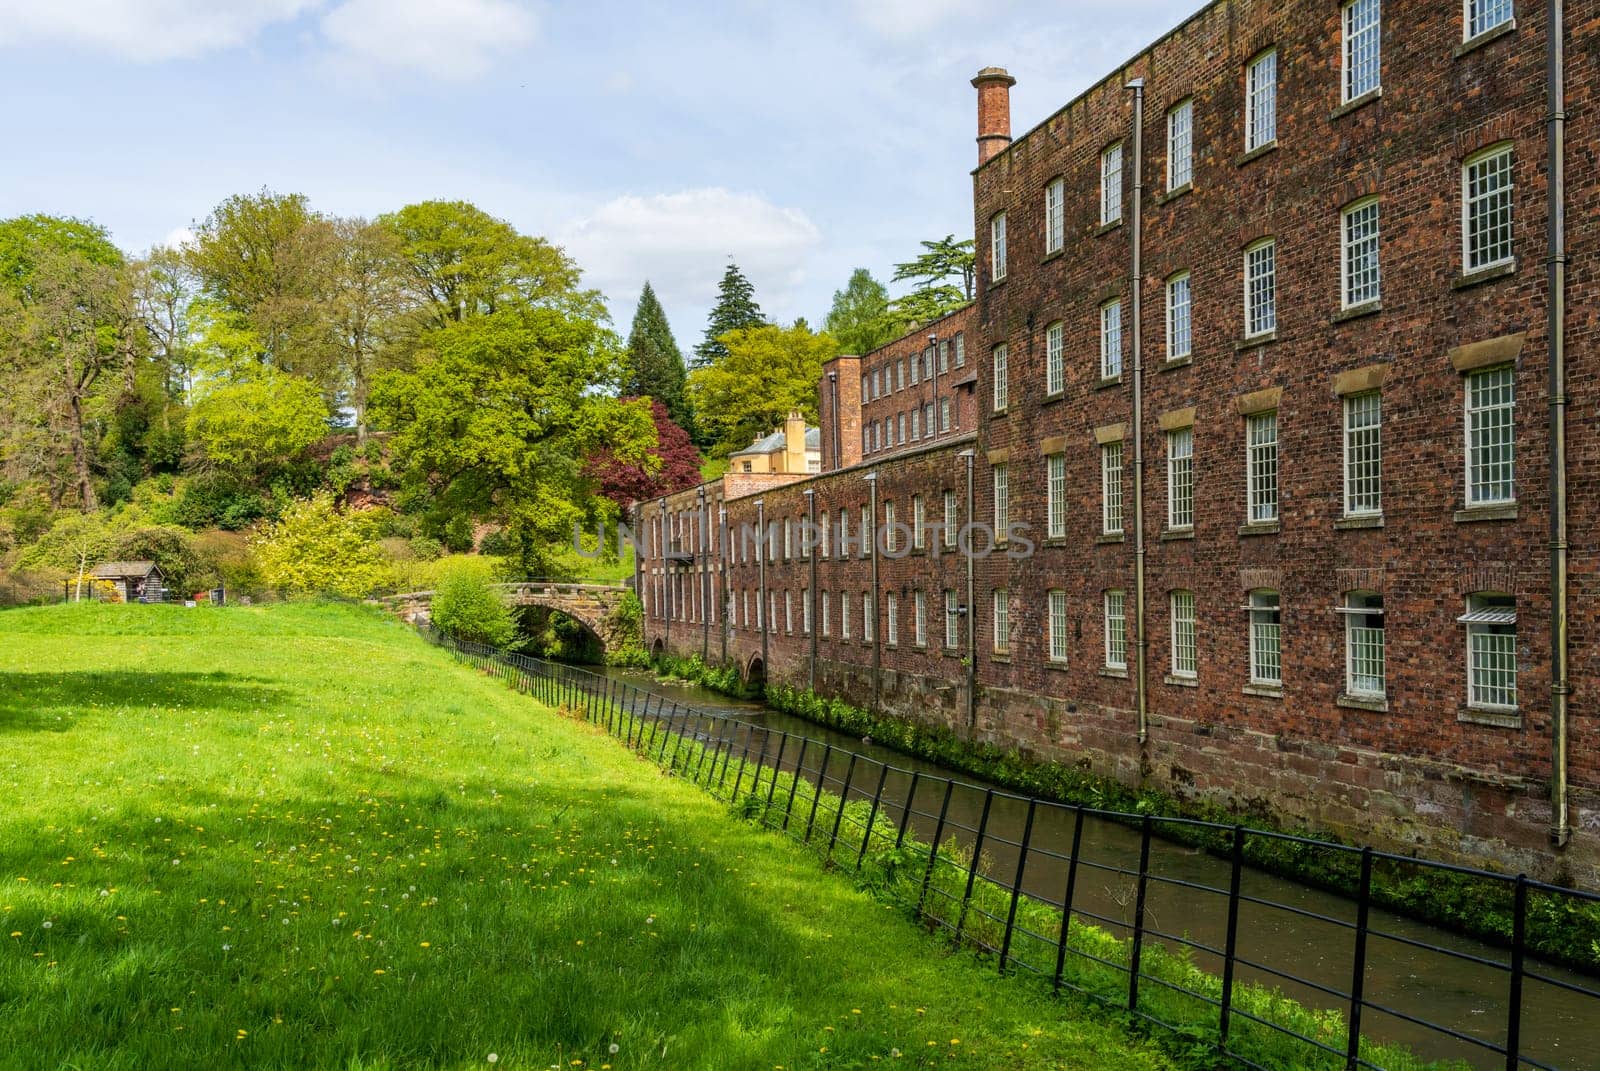 Restored industrial cotton mill in Northern England by steheap